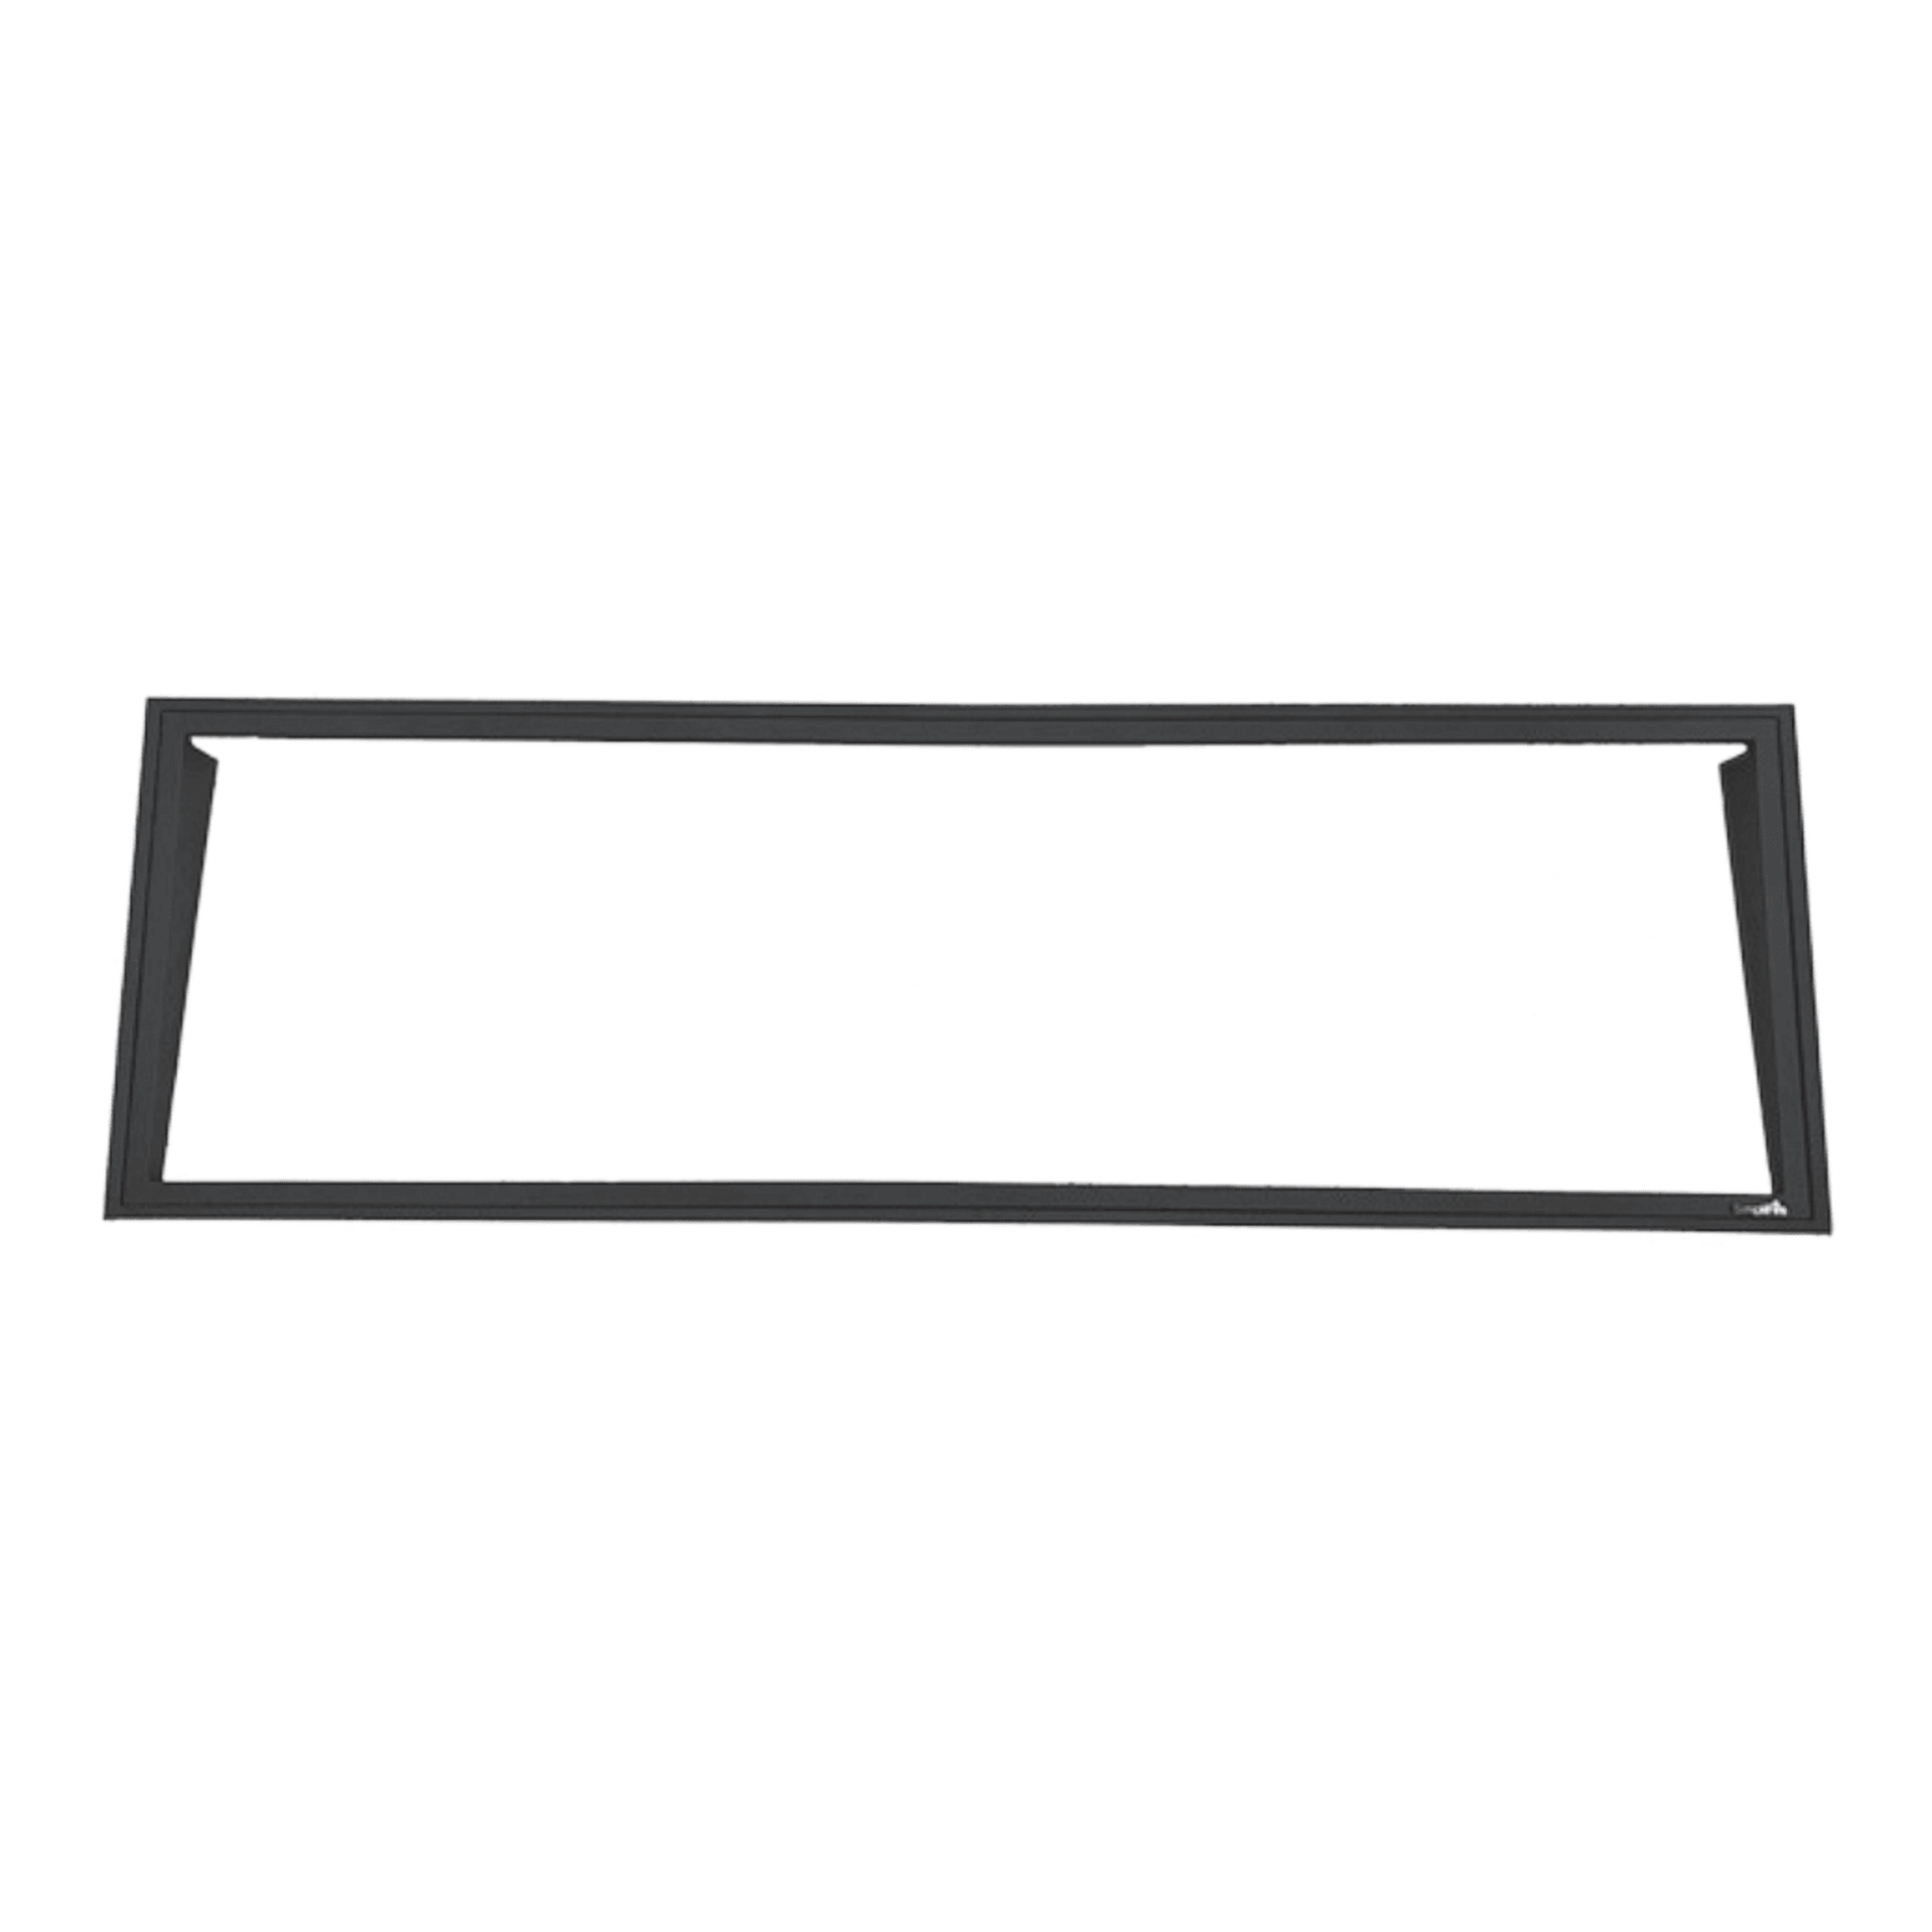 SimpliFire Standard Front for 43" Scion Fireplace